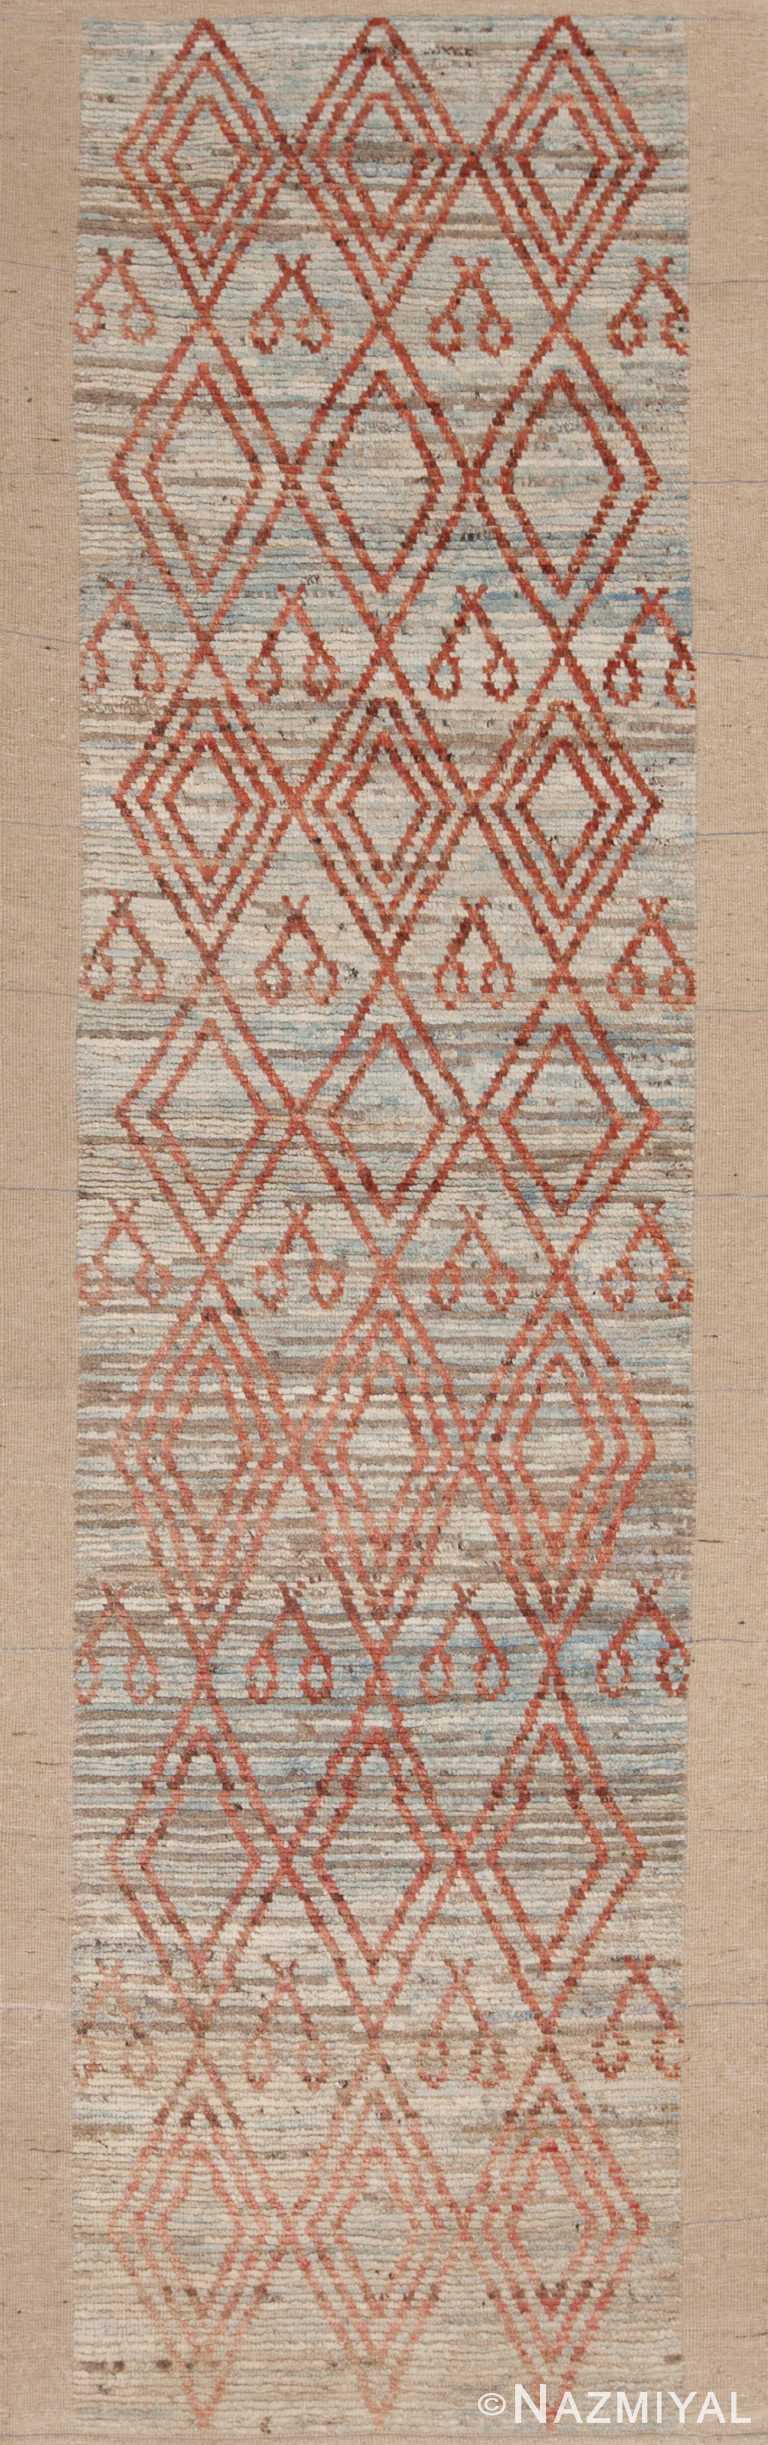 A Captivating and Beautiful Modern Light Blue Color Background Rustic Tribal Geometric Diamond Pattern Contemporary Runner Rug 11096 by Nazmiyal Antique Rugs